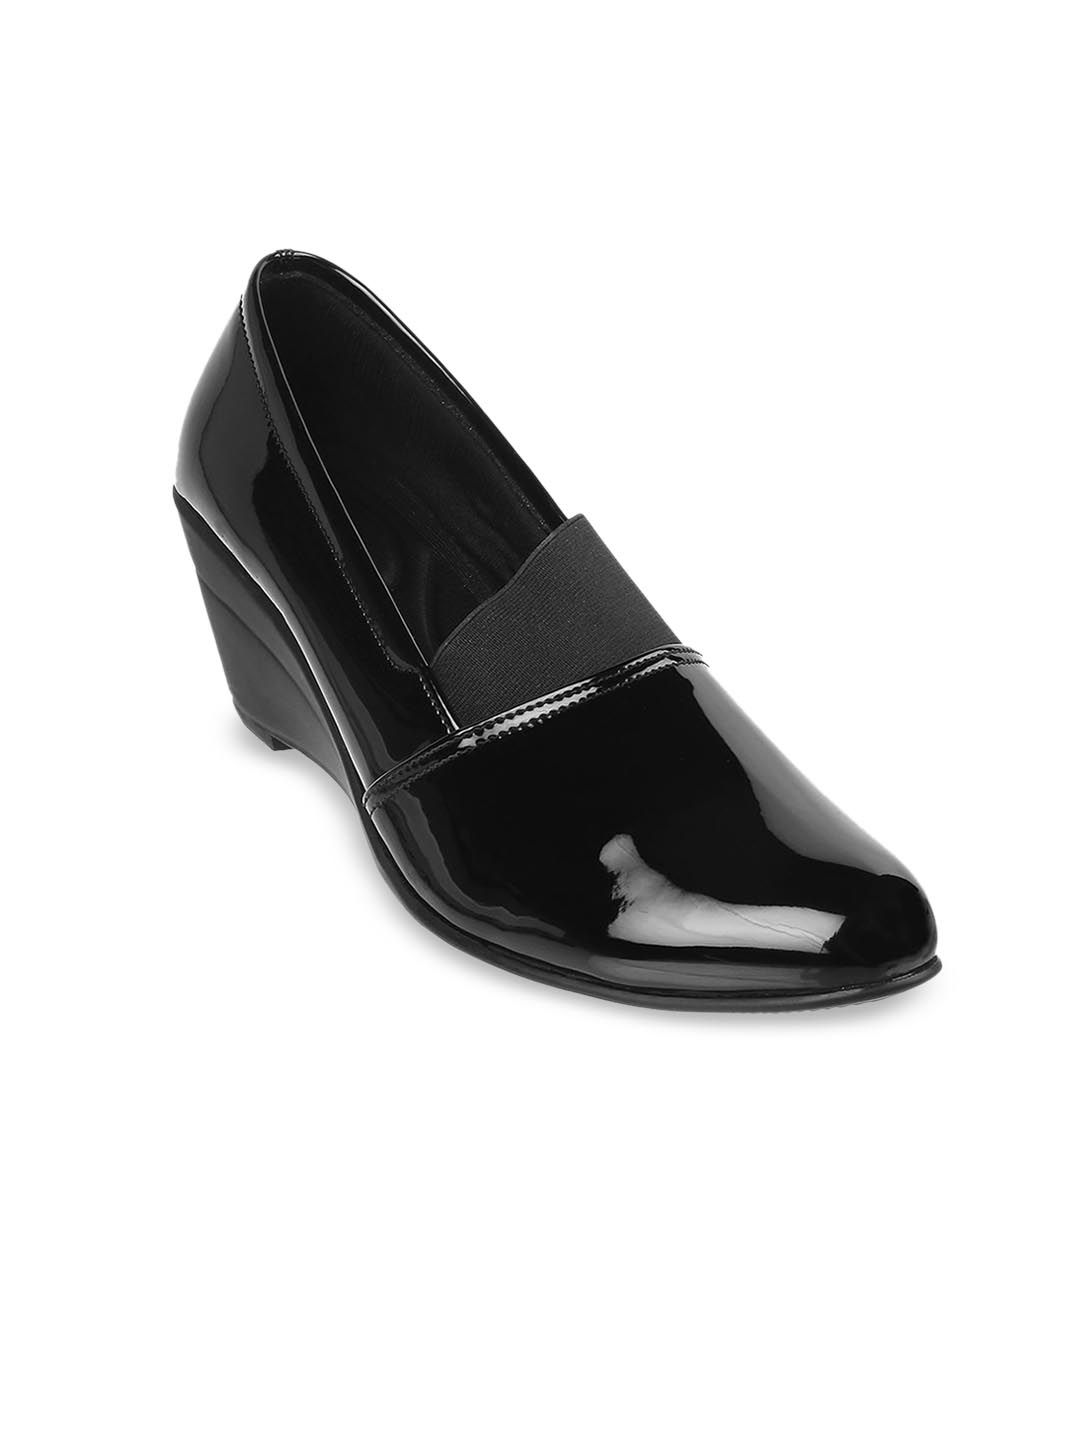 Mochi Black Wedge Pumps Price in India